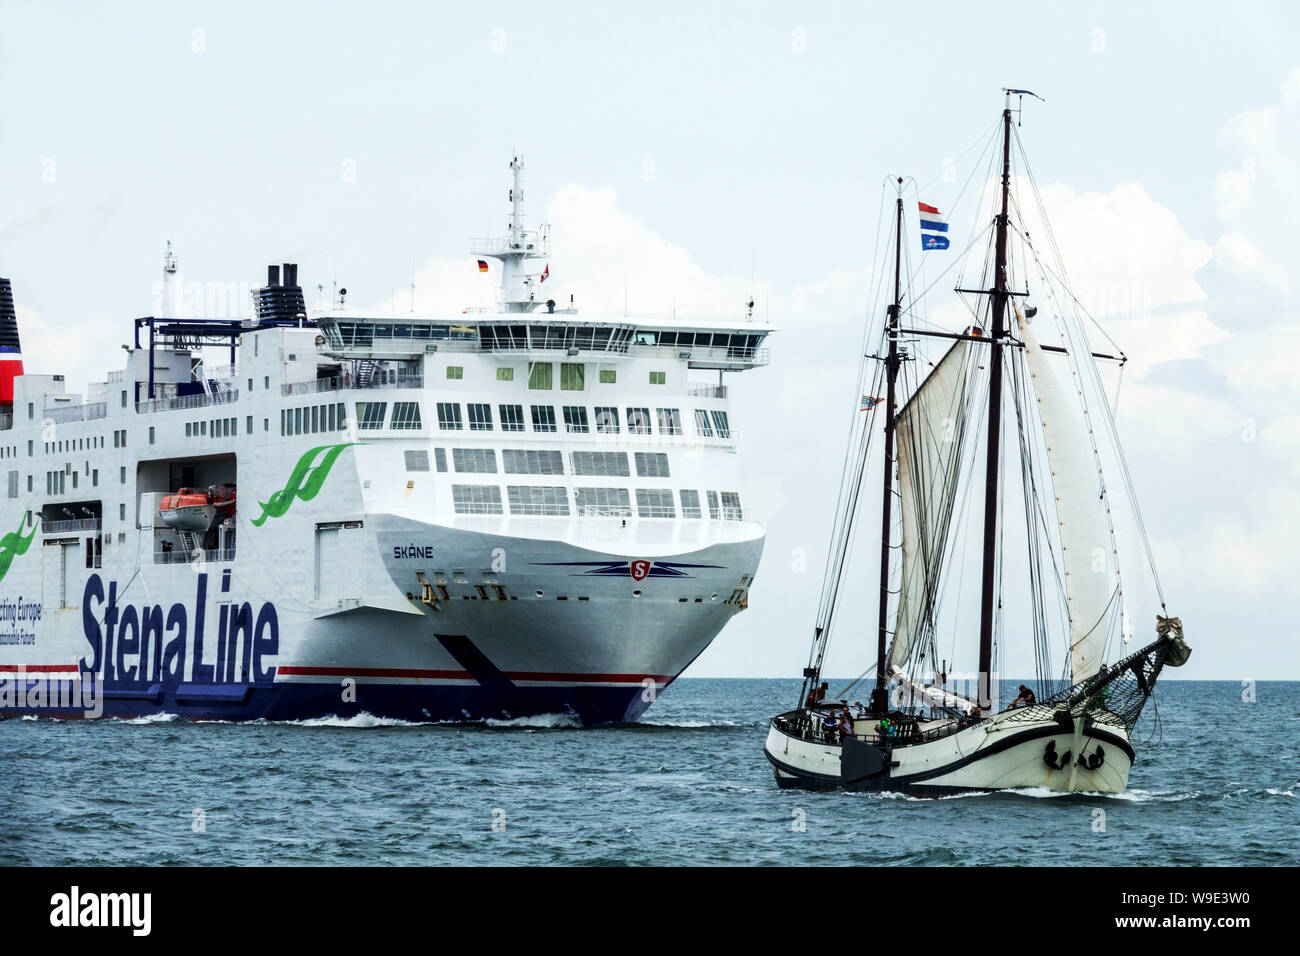 Sailing boat and Stena line ferry approaching the harbor, Rostock Germany Stock Photo